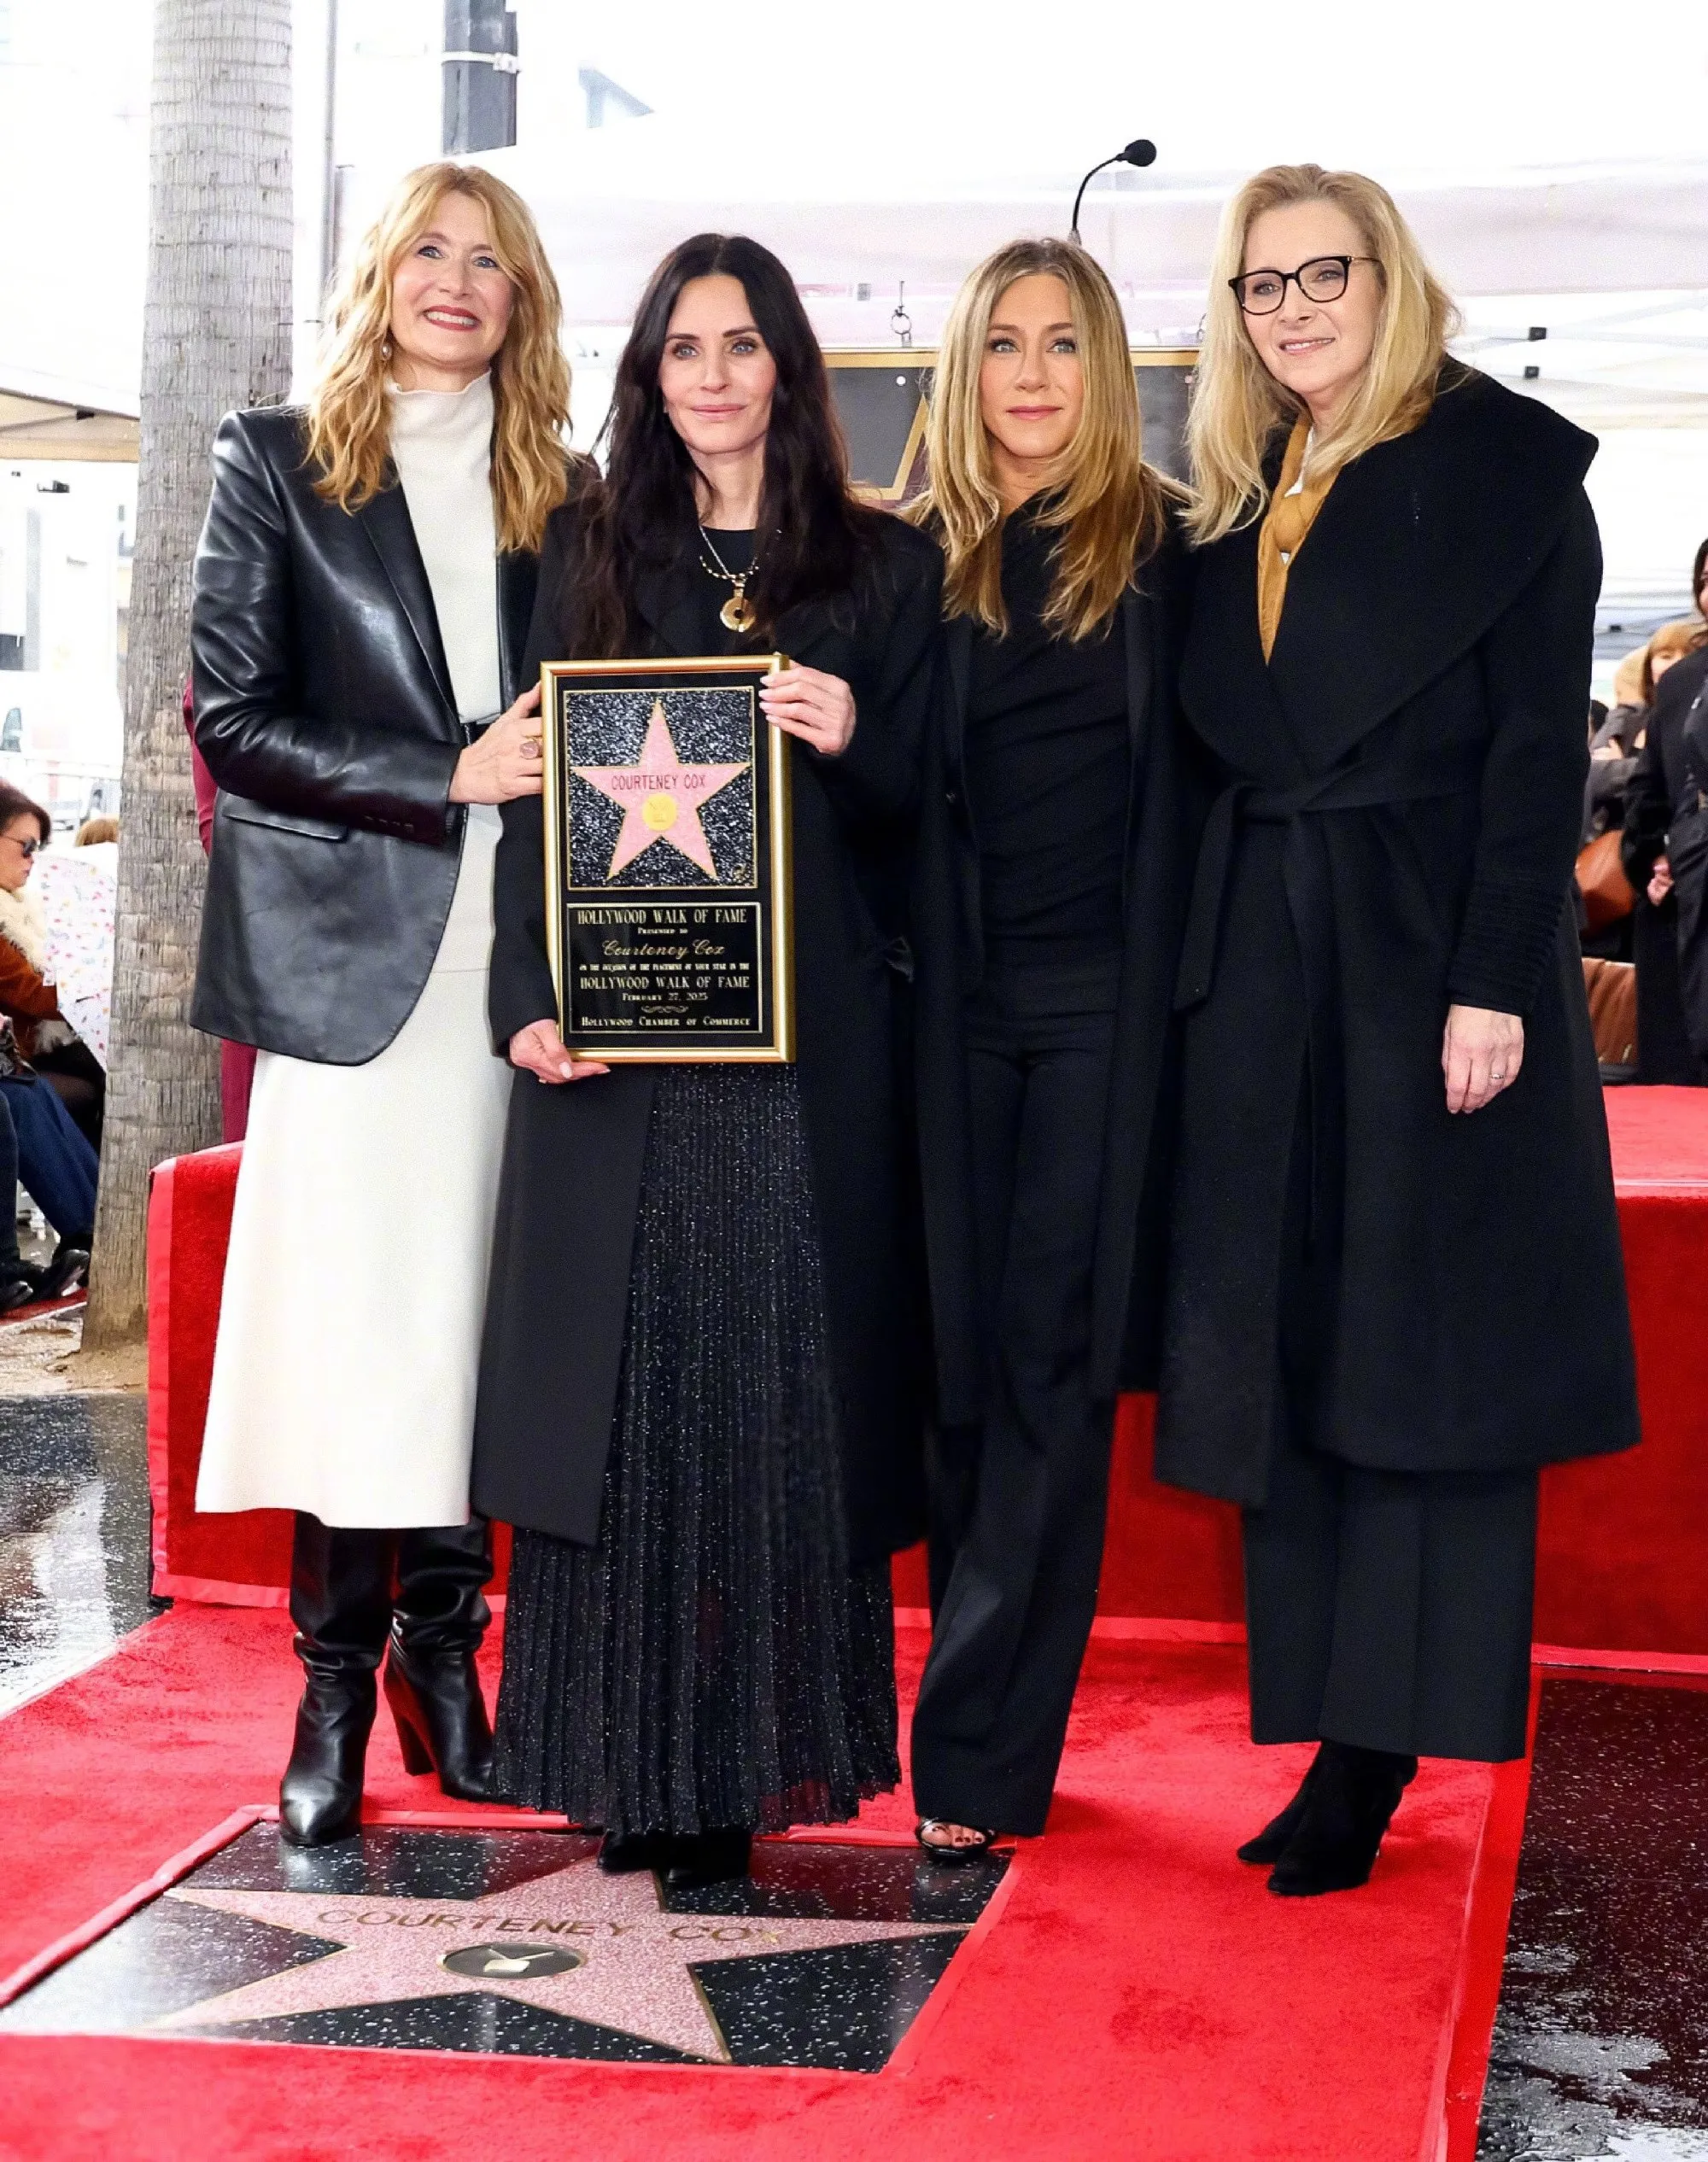 Courteney Cox leaves a star of her own at Hollywood's Walk Of Fame | FMV6